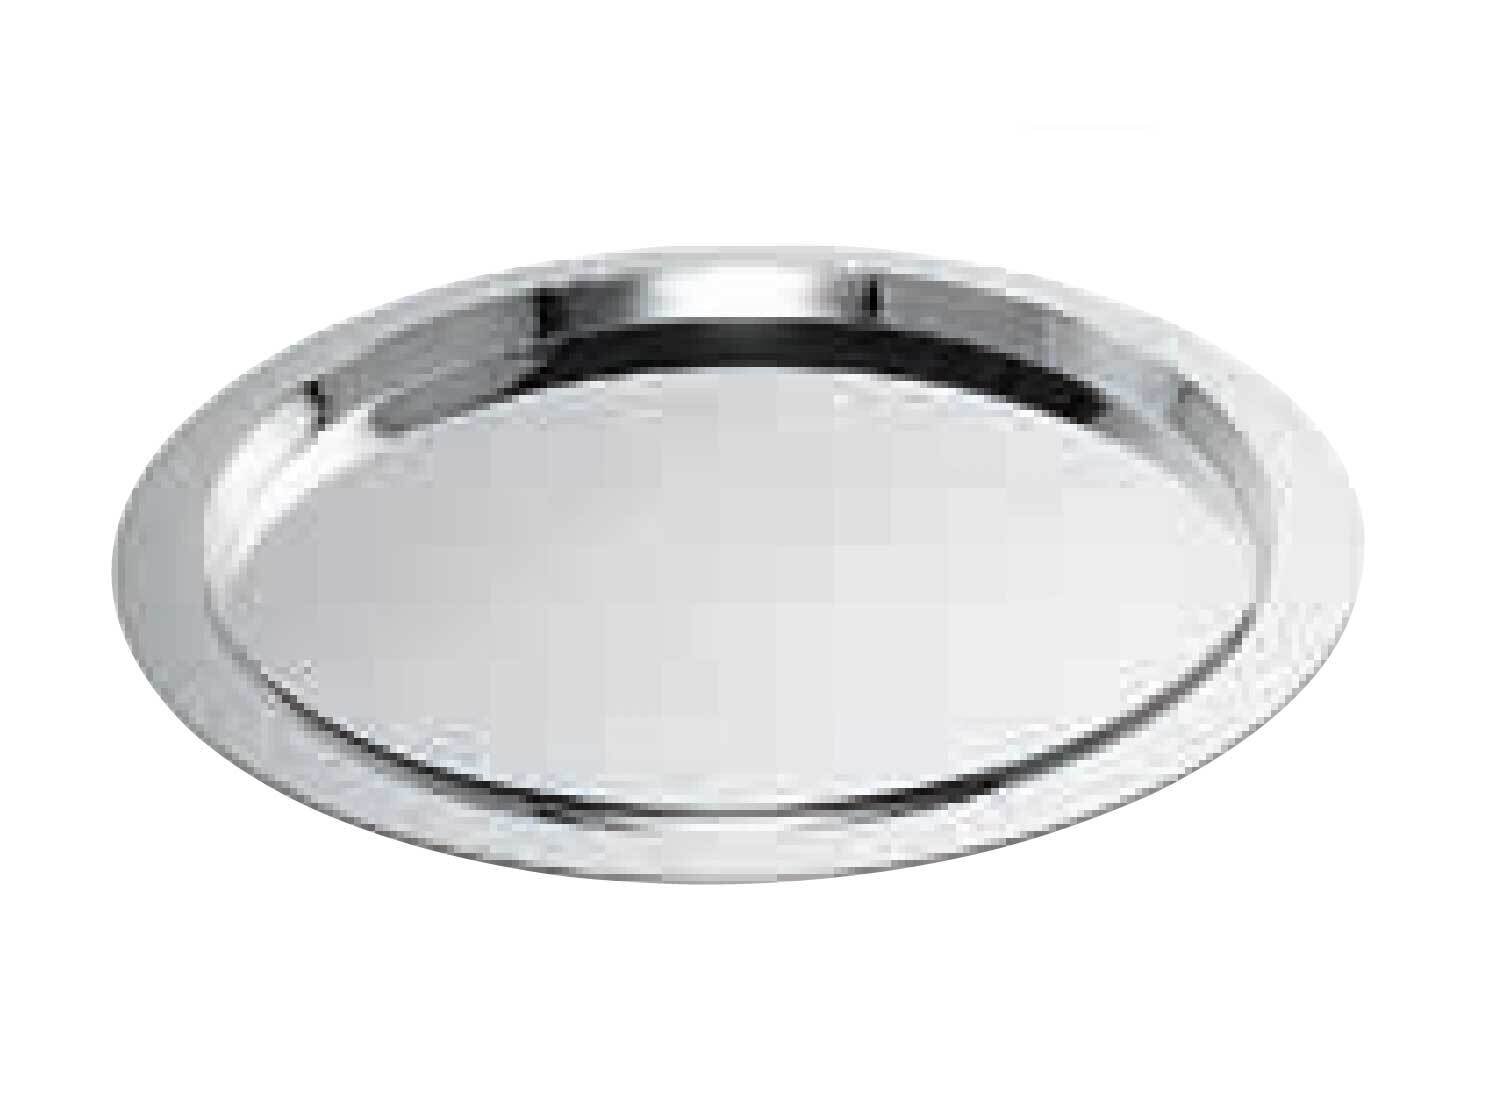 Ercuis Saturne Round Tray 0.75 Inch Stainless Steel F444460-35